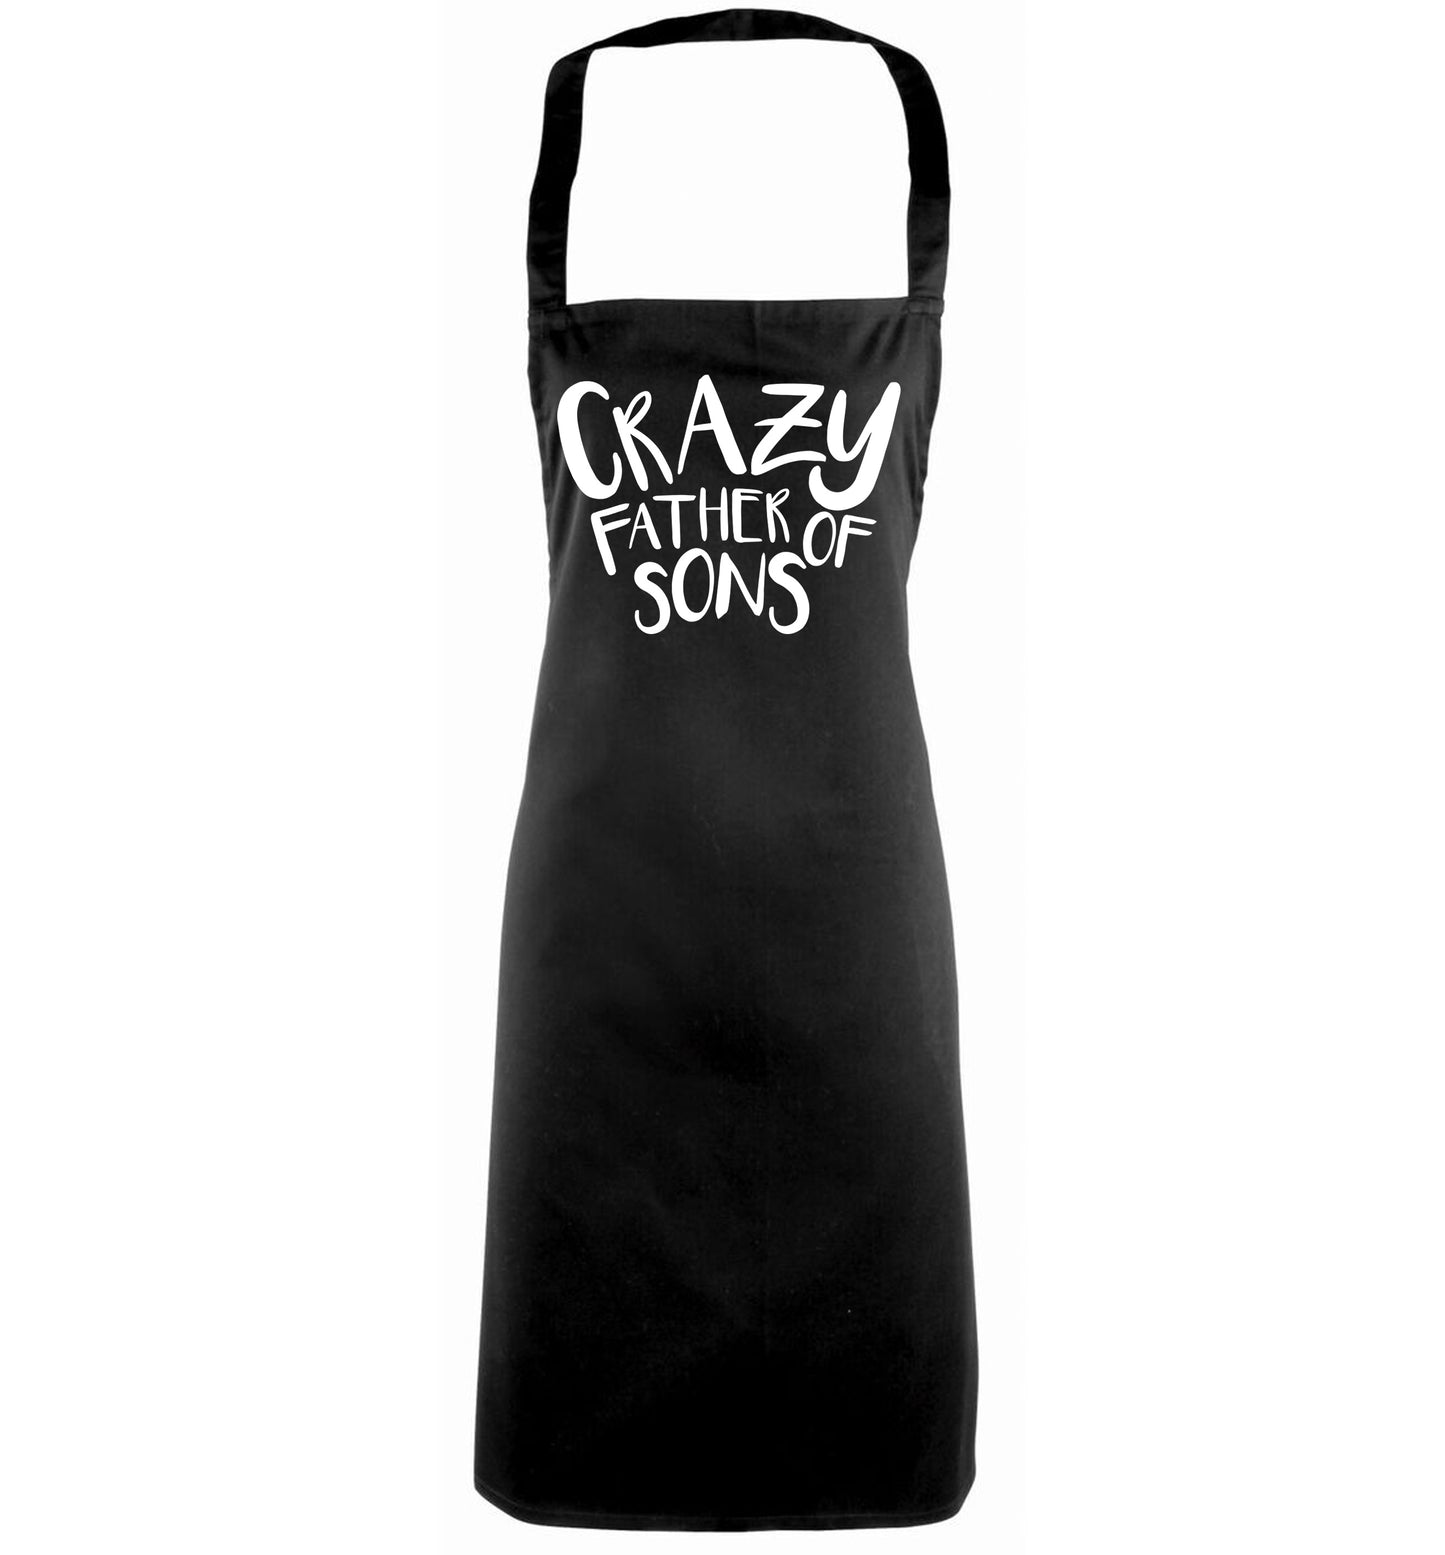 Crazy father of sons black apron